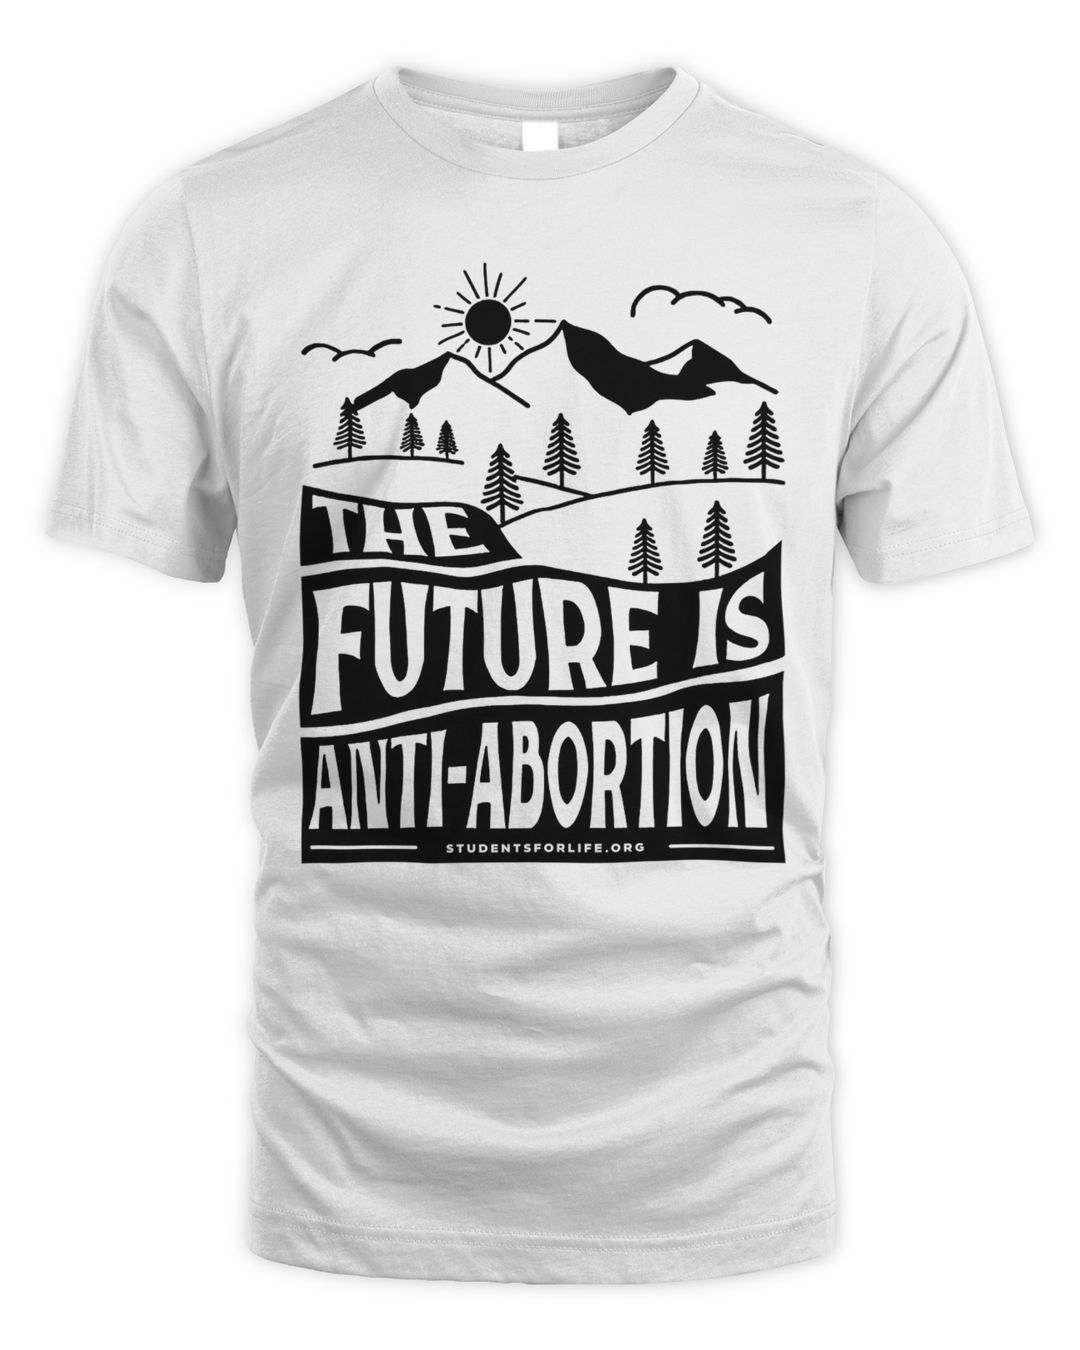 The Future Is Anti-Abortion Shirt